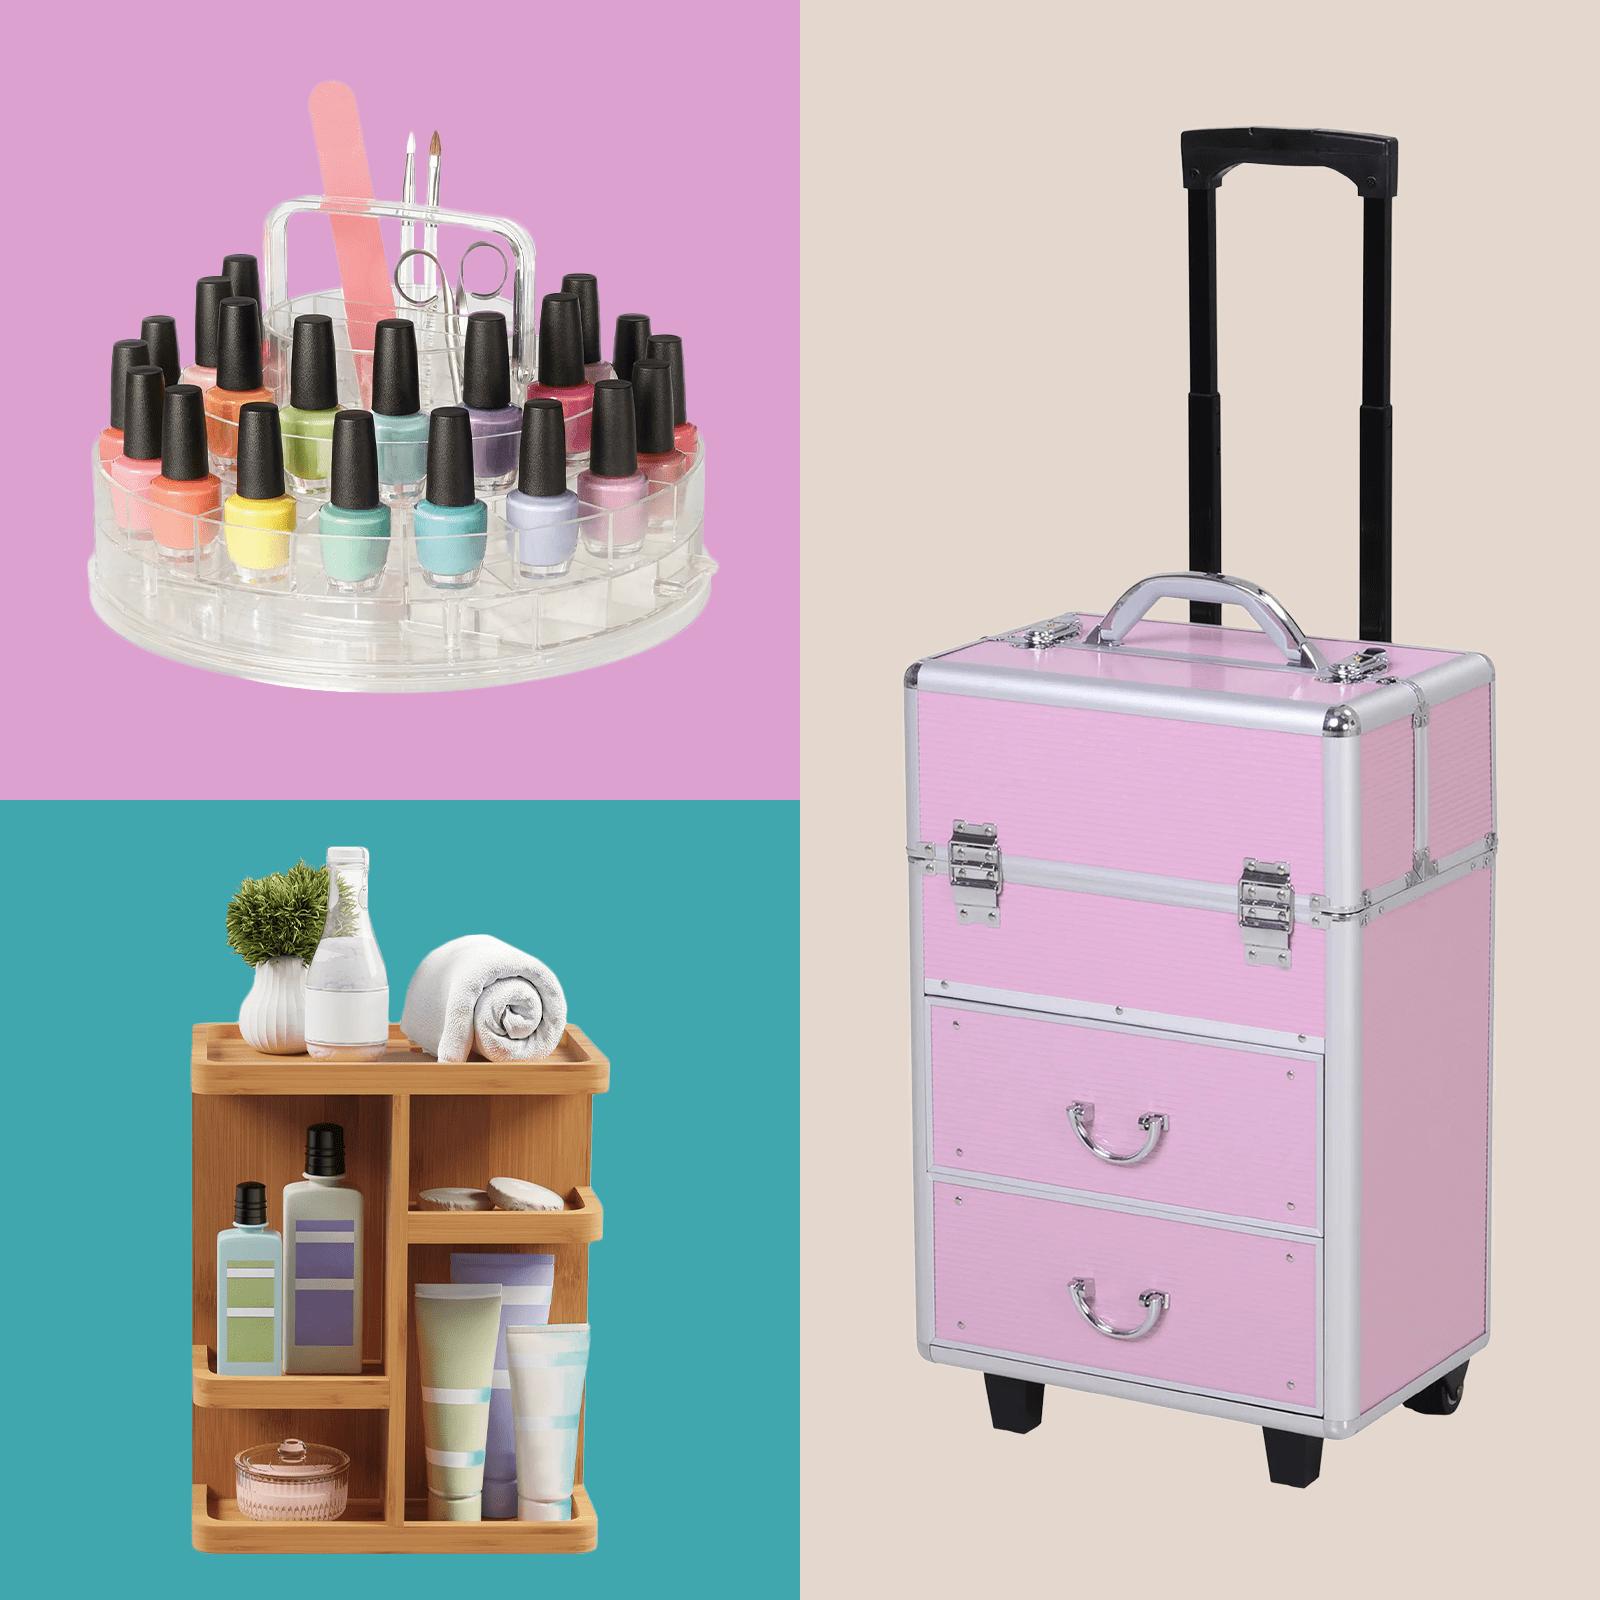 https://www.rd.com/wp-content/uploads/2022/05/15-best-makeup-organizers-to-declutter-any-space-ecomm-ft-via-merchant.png?fit=700%2C700